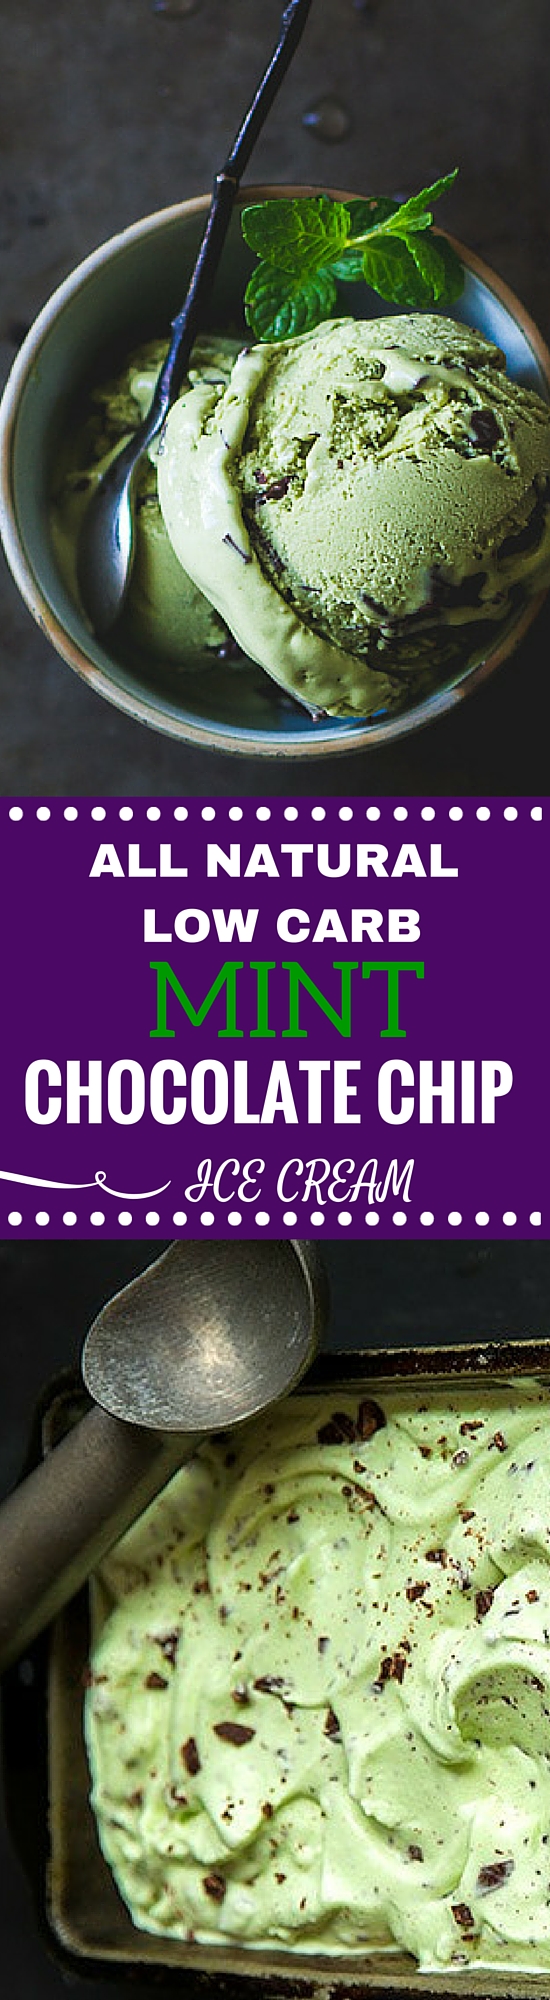 Low Carb Mint Chocolate Chip Ice Cream | www.4hourbodygirl.com